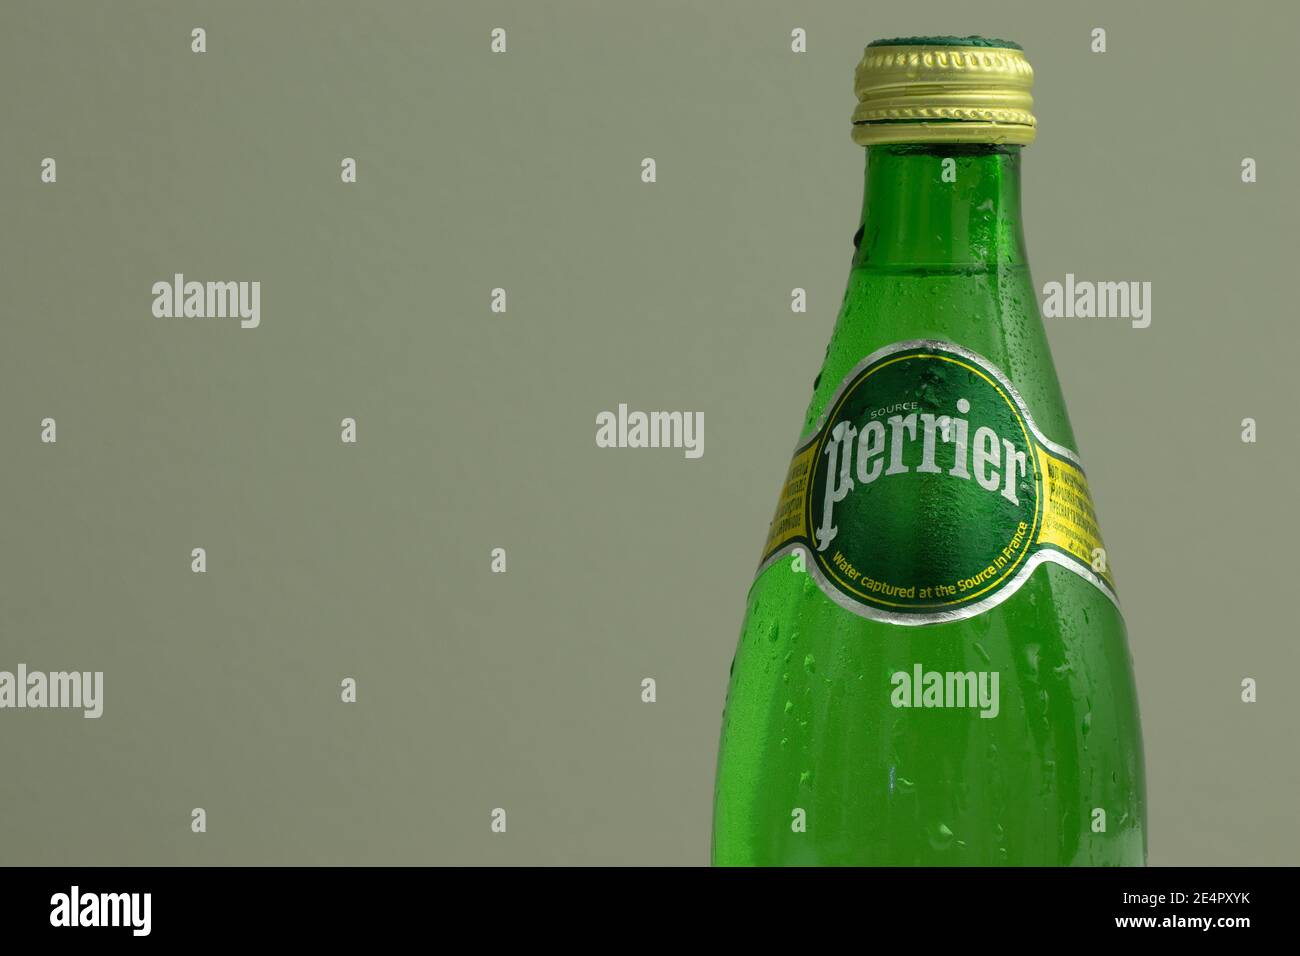 New York, USA - 1 January 2021: Perrier mineral water logo on bottle with copy space on backgorund, Illustrative Editorial Stock Photo